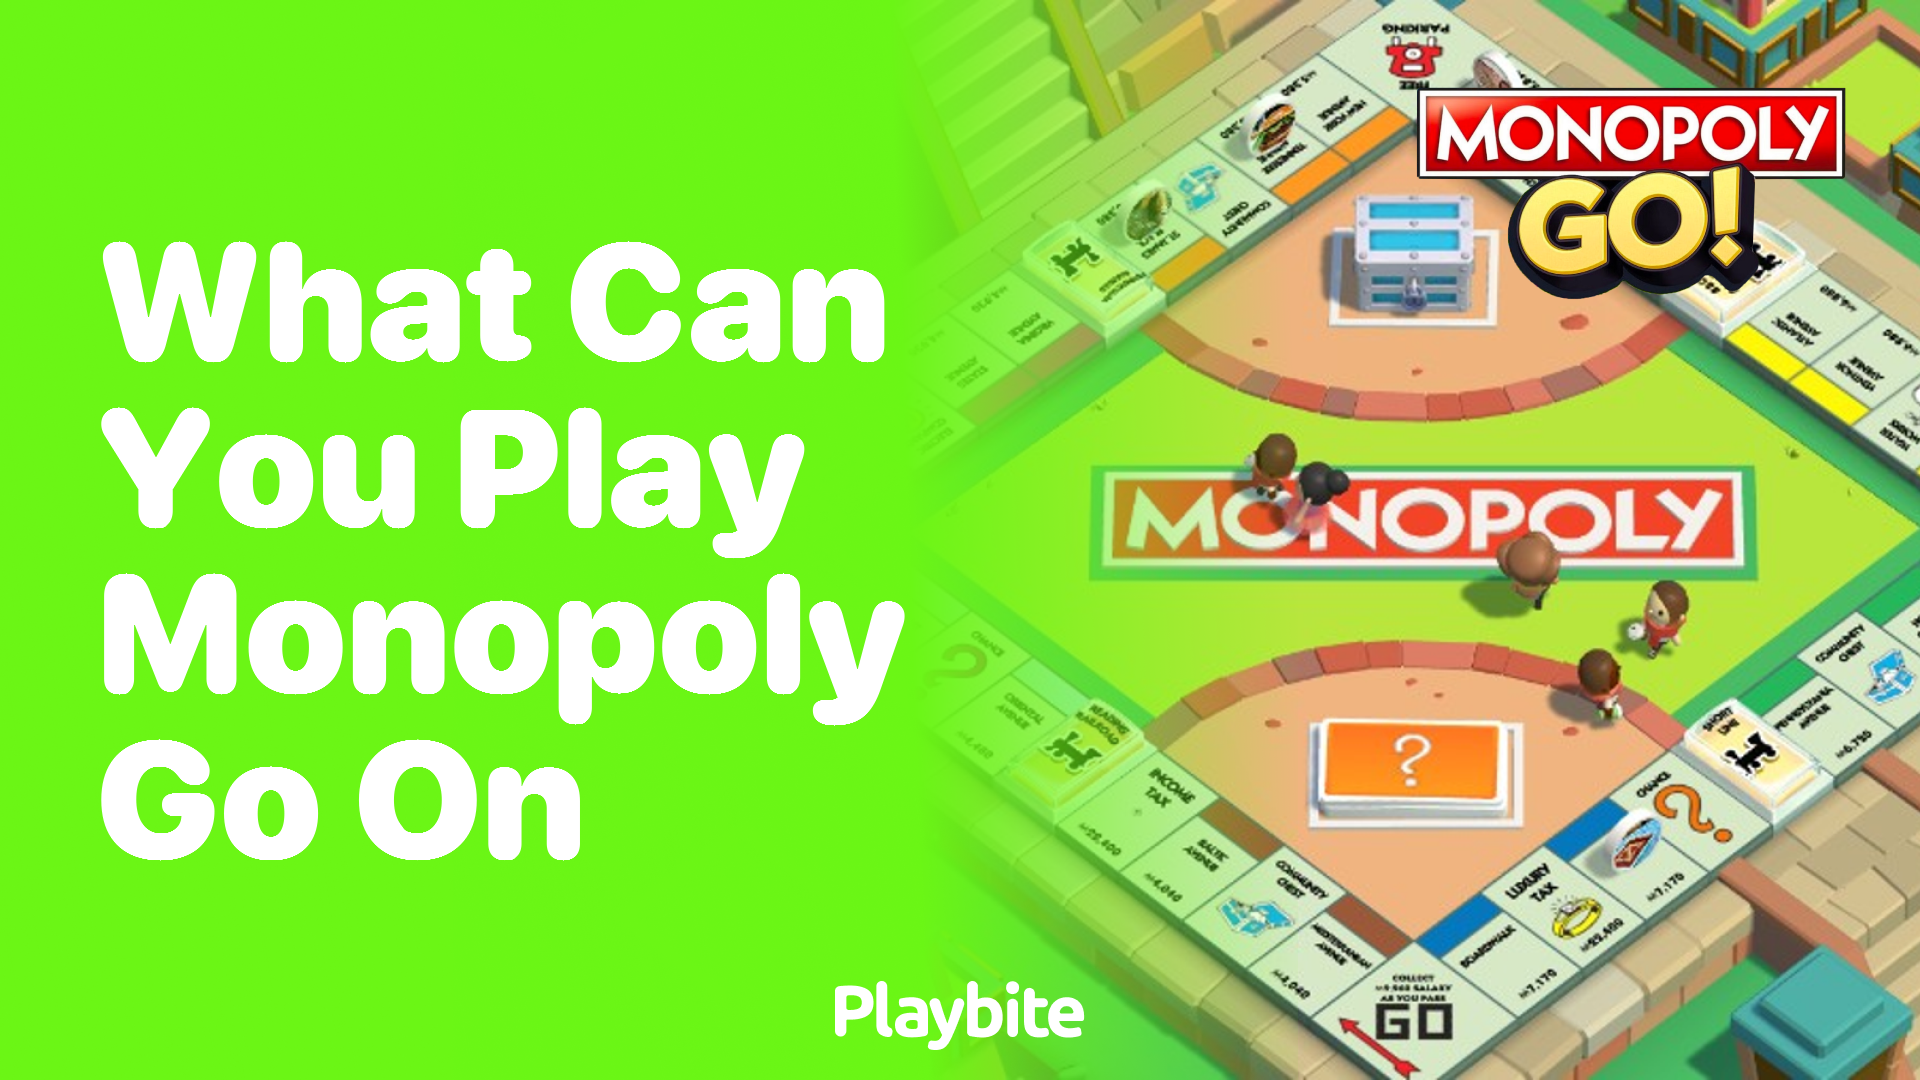 What Devices Can You Play Monopoly Go on?